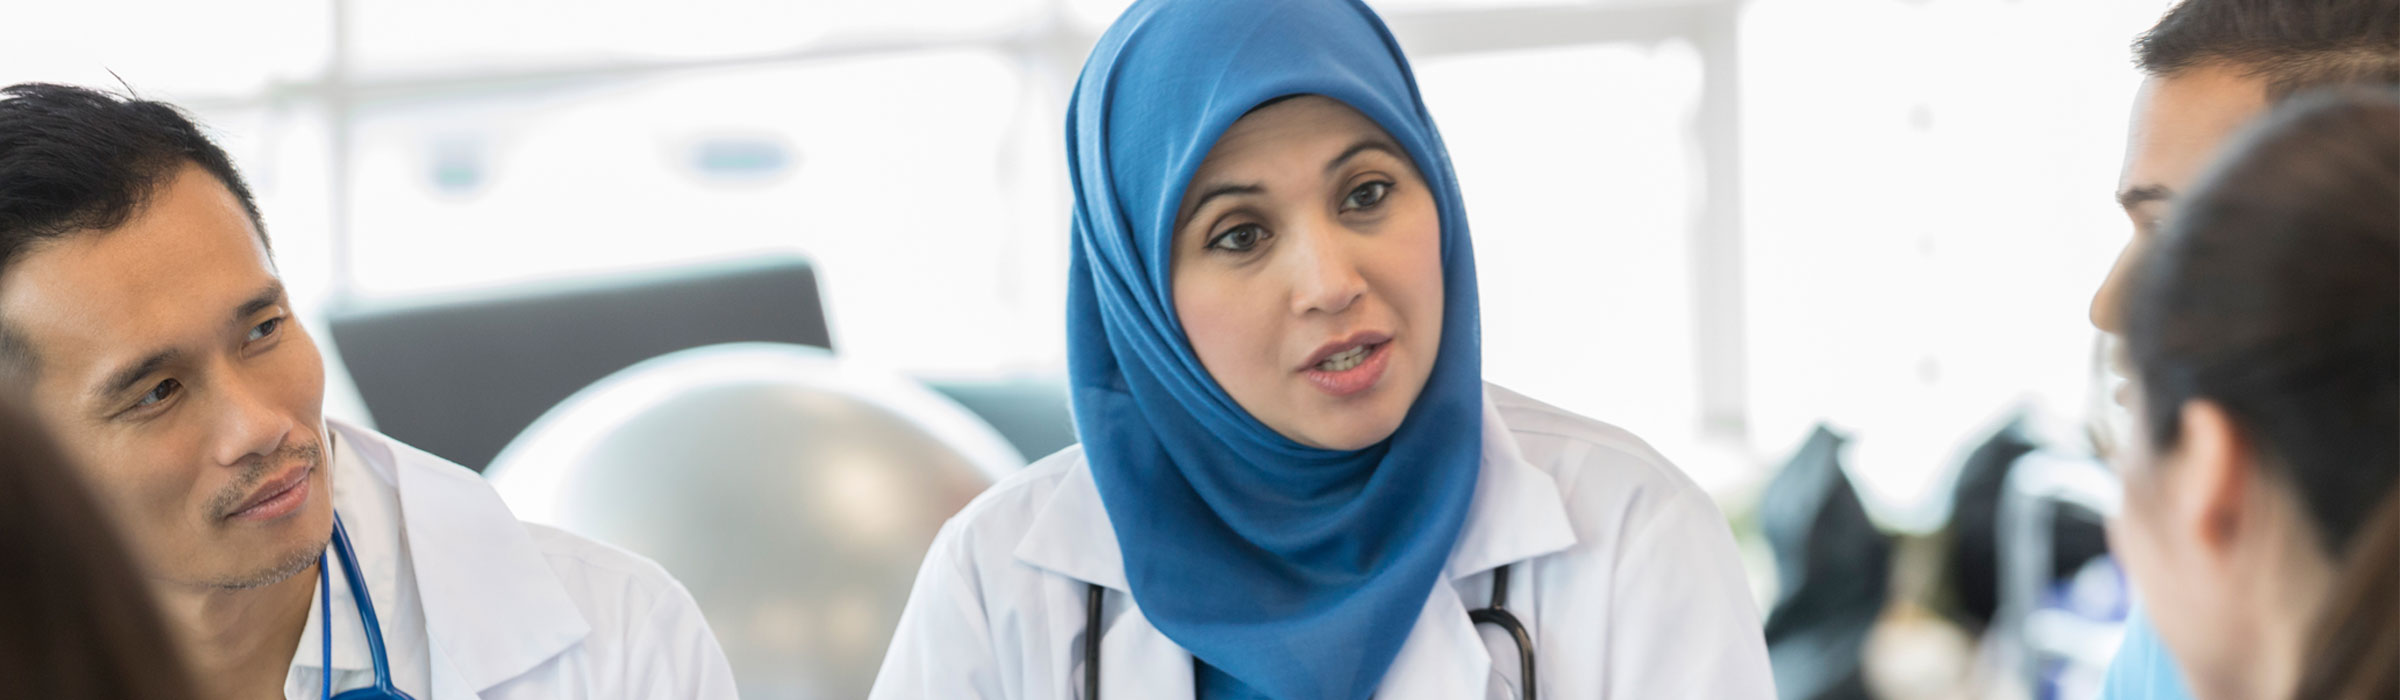 Woman doctor wearing a hijab talking to other doctors